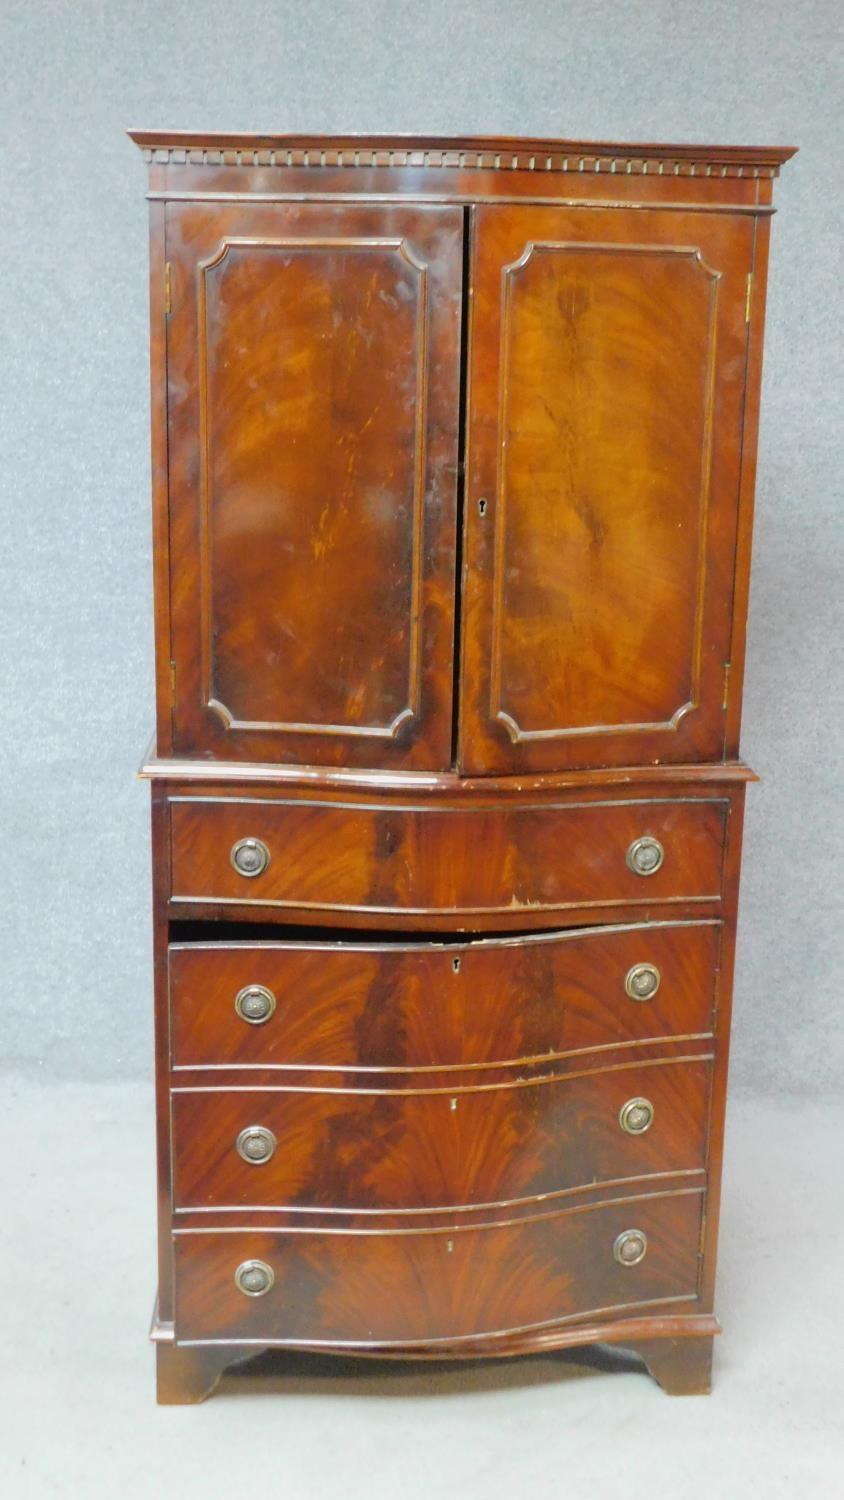 A Georgian style flame mahogany tallboy with panel doors enclosing shelves above drawer and panel